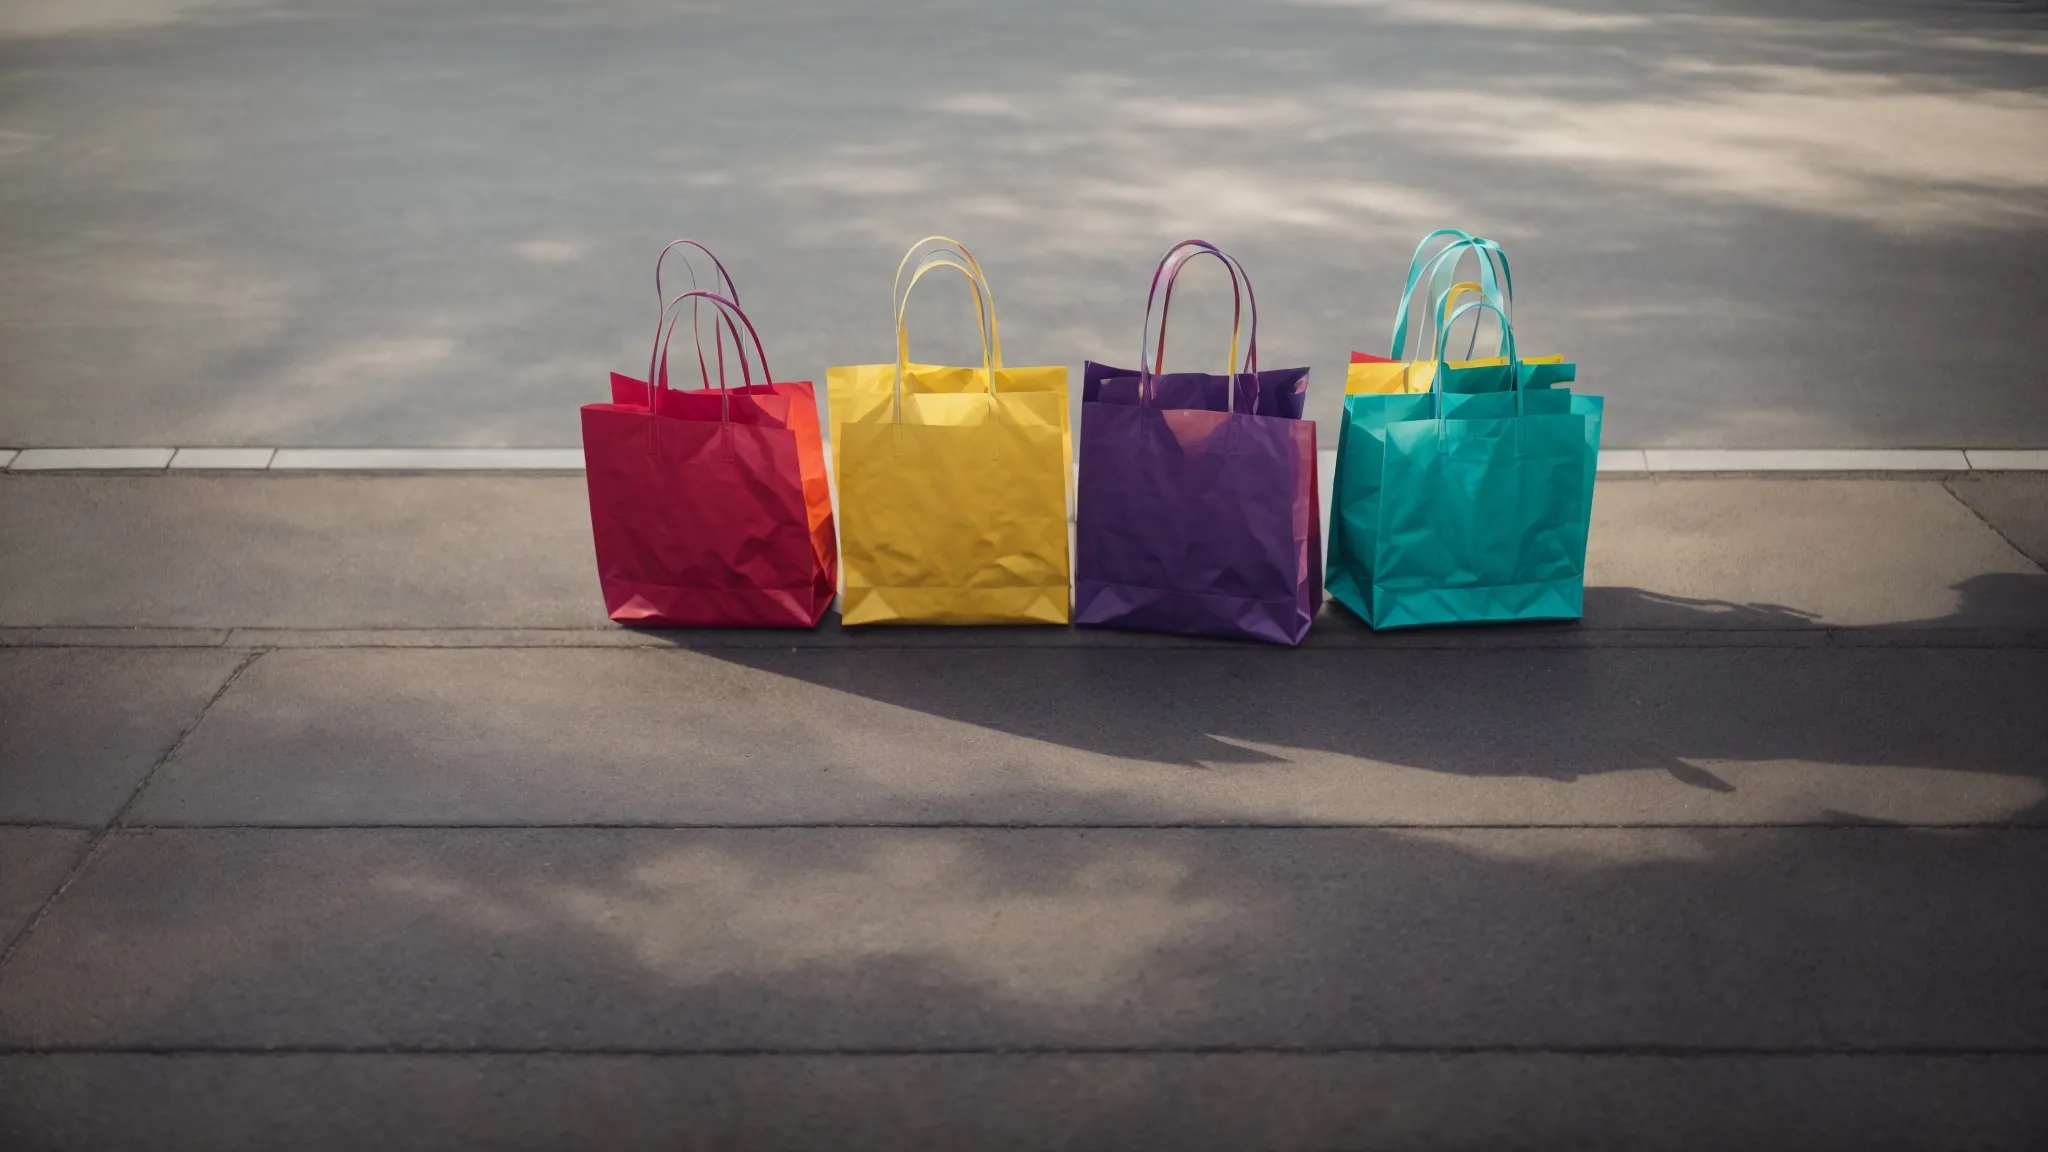 a row of colorful shopping bags lined up on a sleek laptop keyboard, symbolizing digital commerce and targeted promotional tactics.